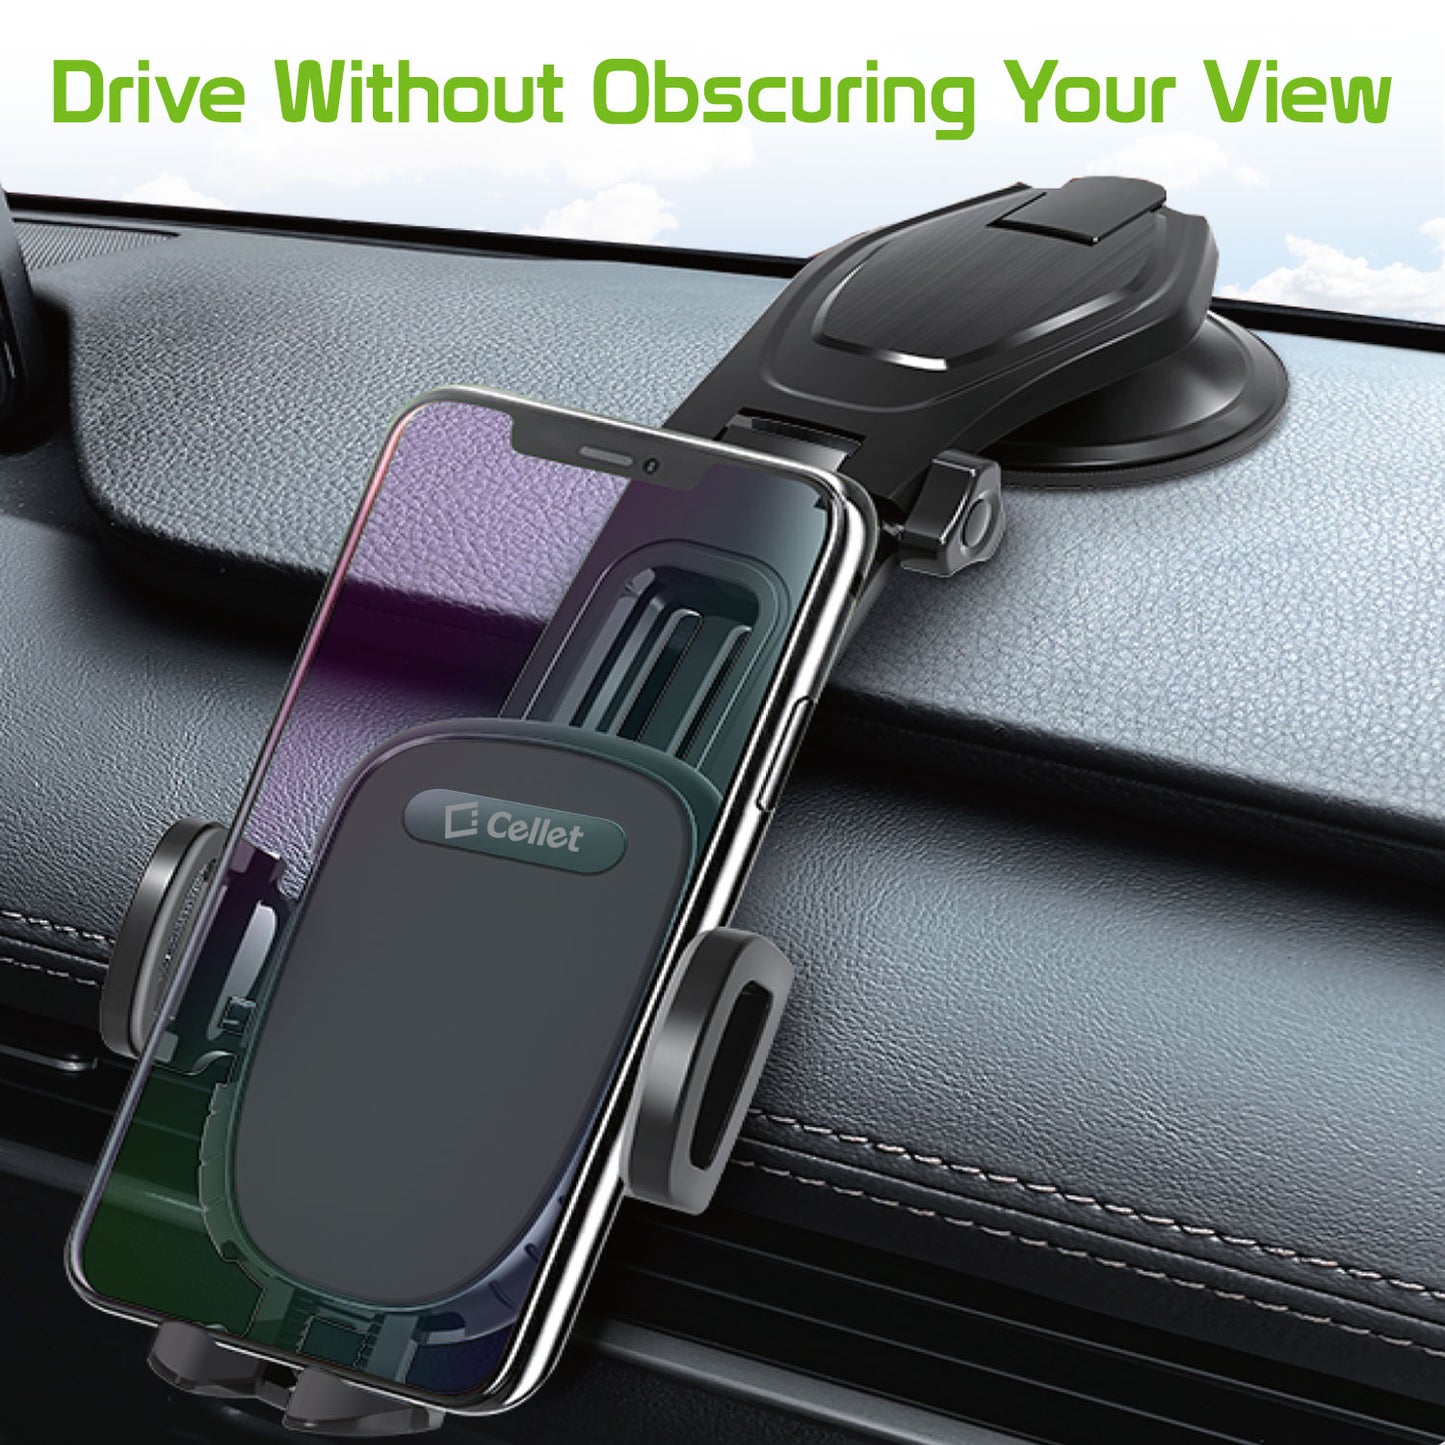 PHC82 - Universal Suction Cup Dashboard Phone Holder with 360 Degree Rotation, One Touch Arm release Button & Lock Lever for Smartphones